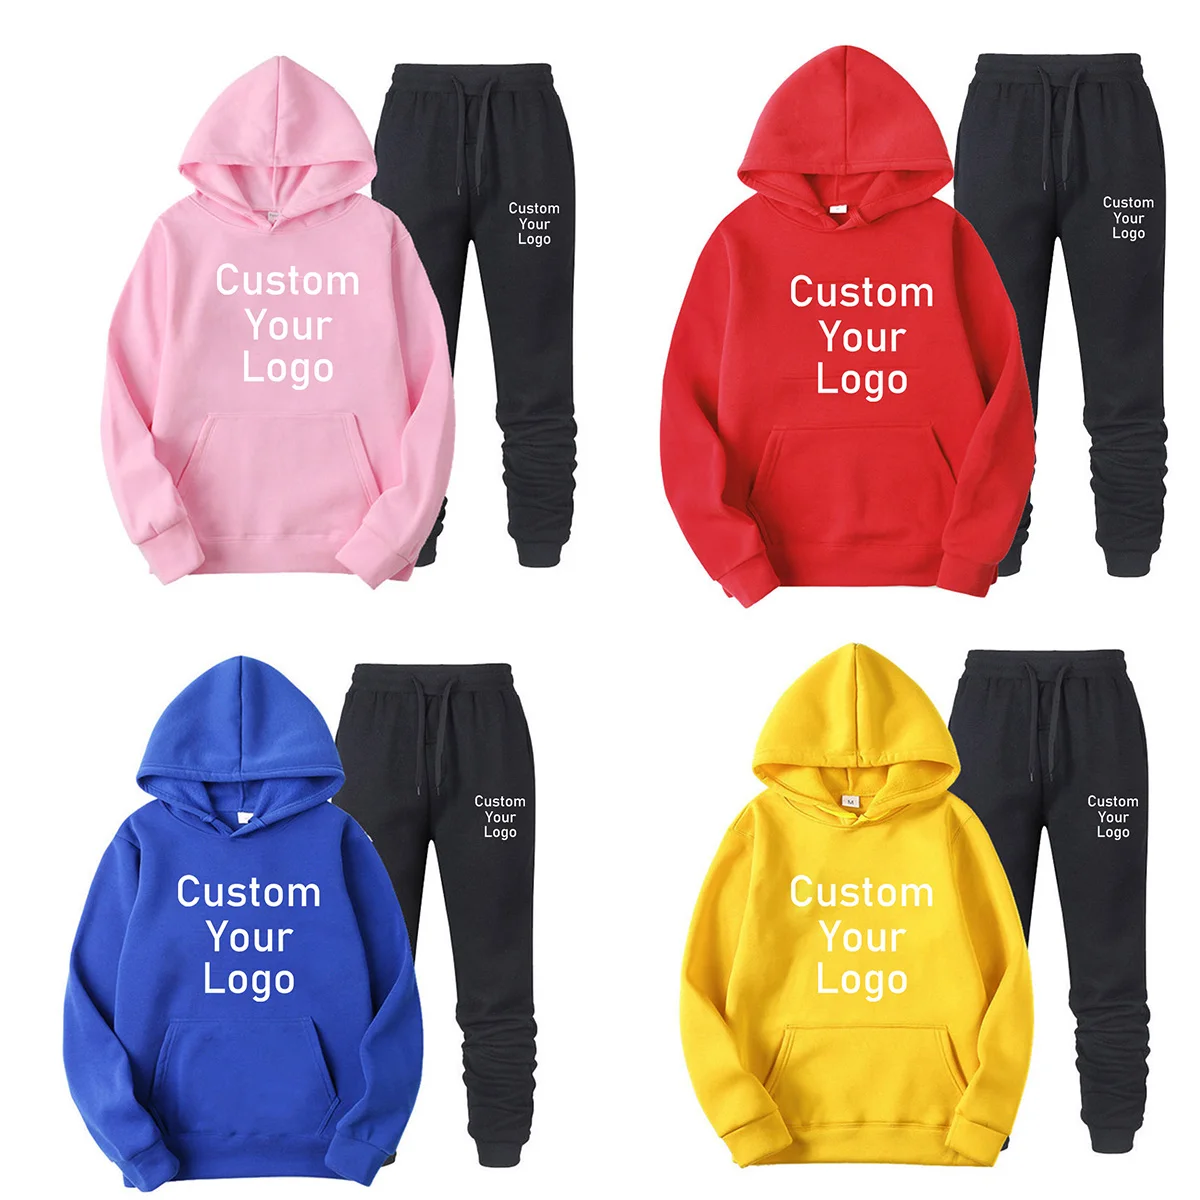 VIP Made Your Own Fashion Brand Design Men Women Sets Tracksuit Custome Autumn Hoodies + Sweatpants Two Piece Suit for Gifts